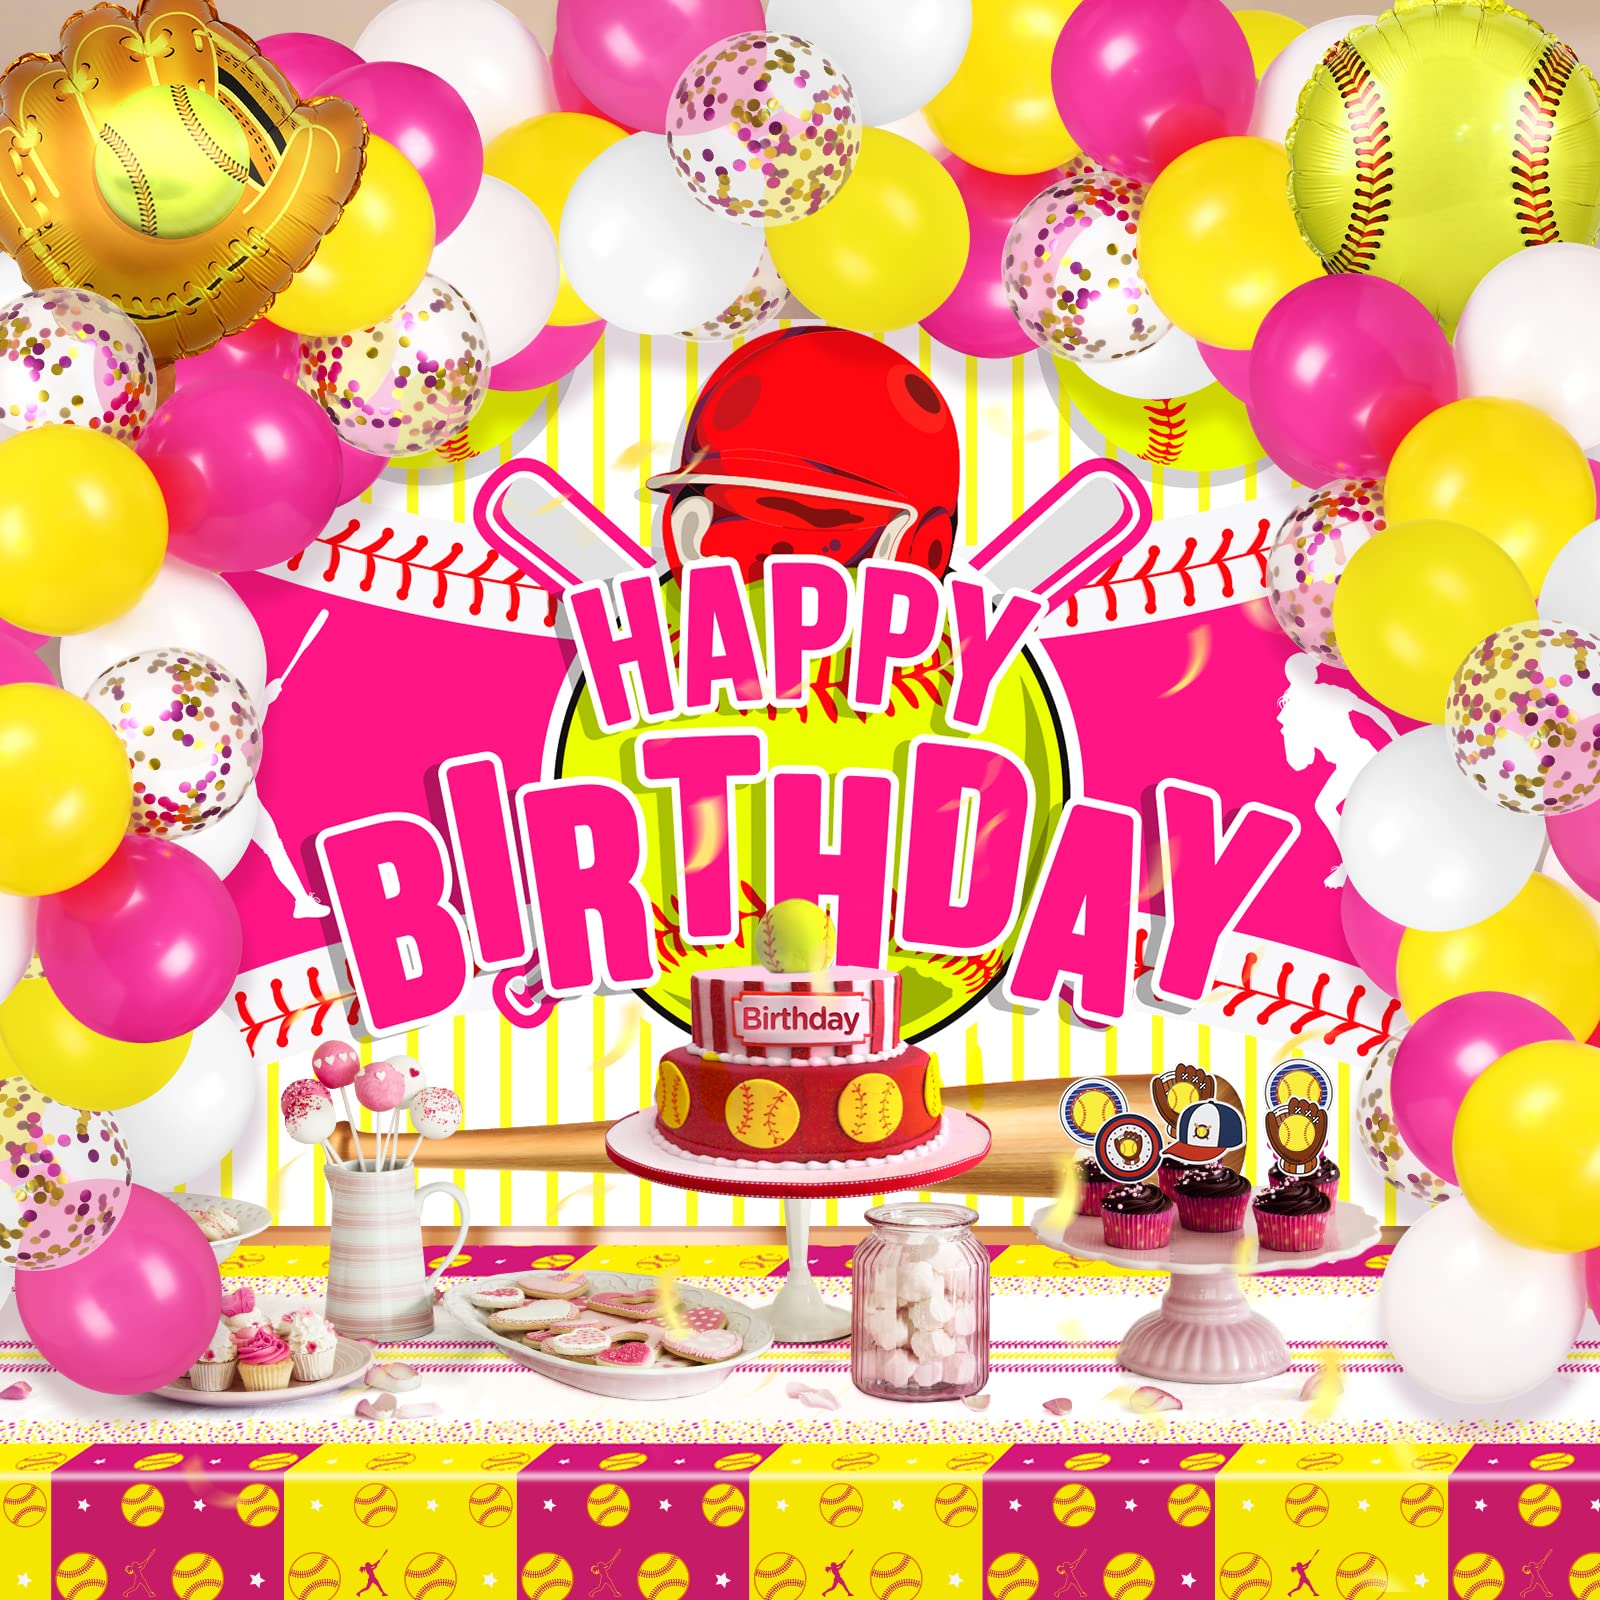 43Pcs Softball Birthday Party Decorations Large Softball Happy Birthday Banner and 42Pcs Softball Party Balloons Garland Kit for Girls Kids Teens Sport Themed Christmas Holiday Birthday Party Supplies